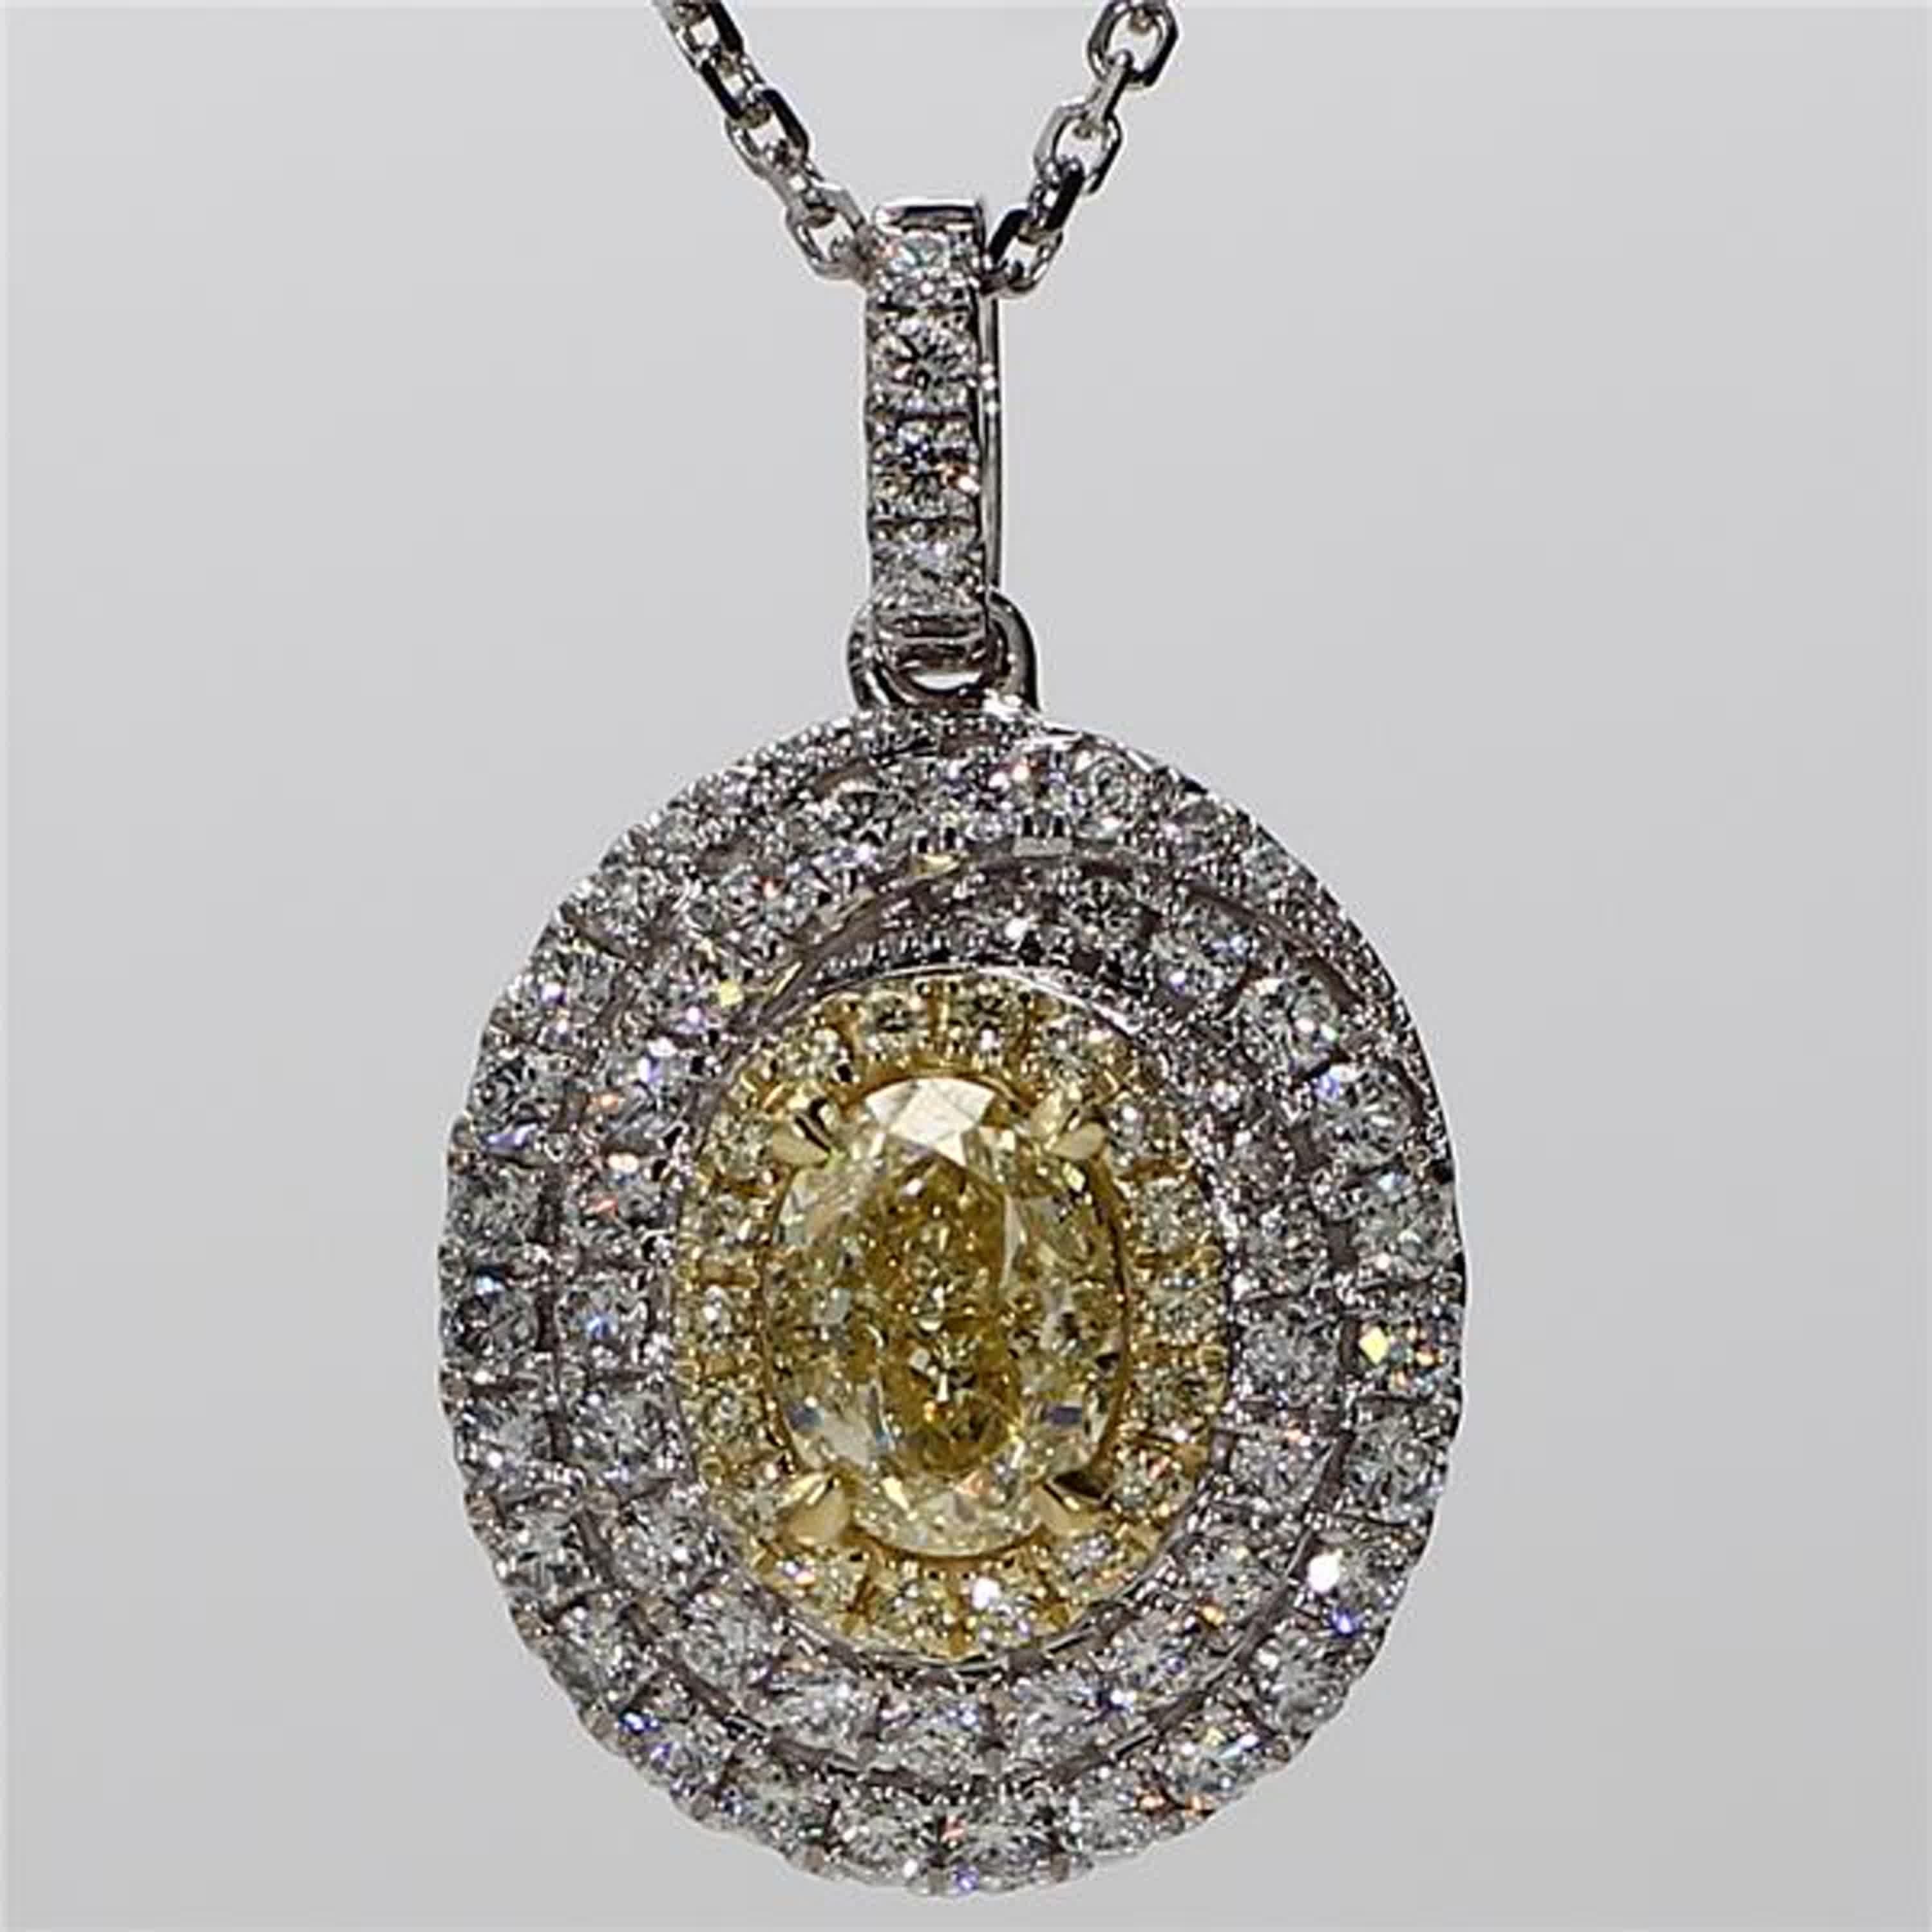 RareGemWorld's classic diamond pendant. Mounted in a beautiful 18K Yellow and White Gold setting with a natural oval cut yellow diamond. The yellow diamond is surrounded by natural round yellow diamond melee and natural round white diamond melee.